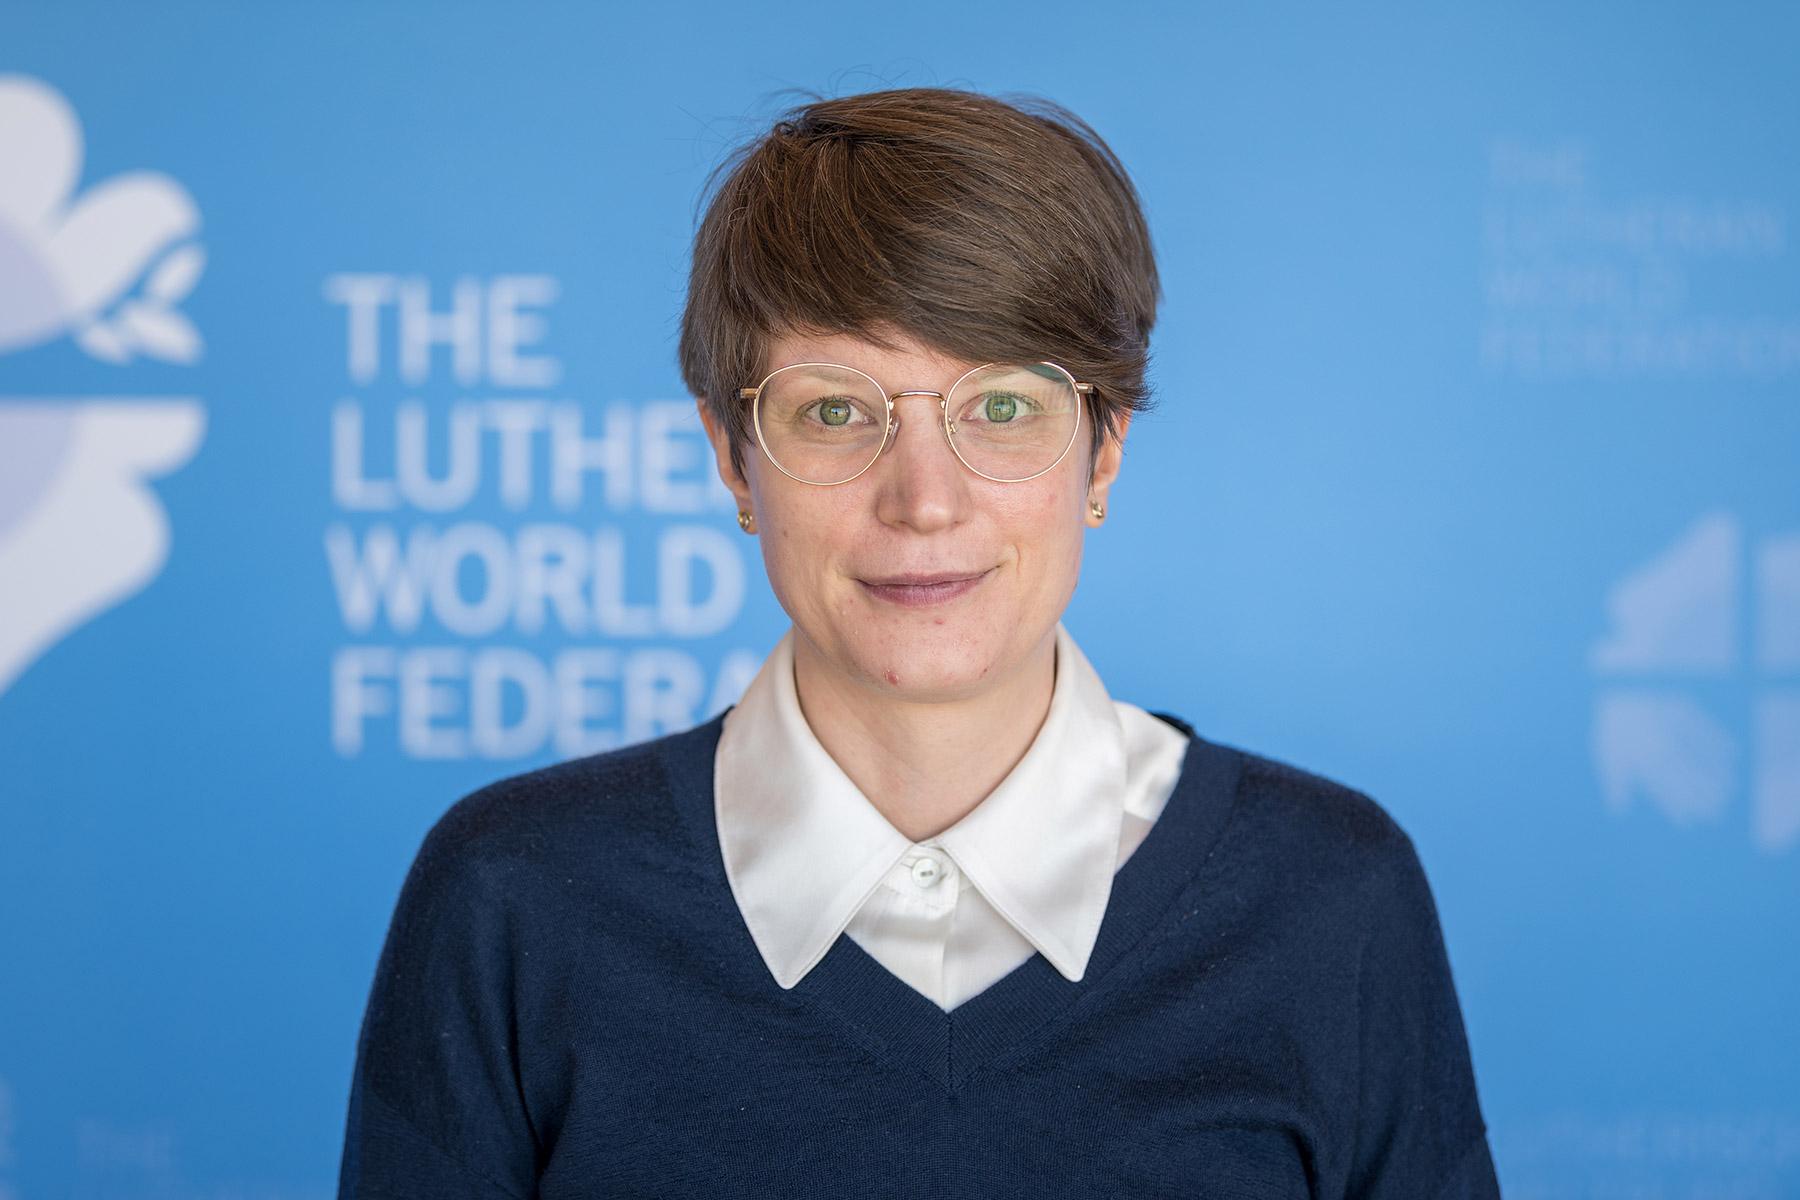 Dr Anna Krauss, LWF Council member and General Secretary of the Council of Lutheran Churches in Britain. Photo: LWF/A. Hillert